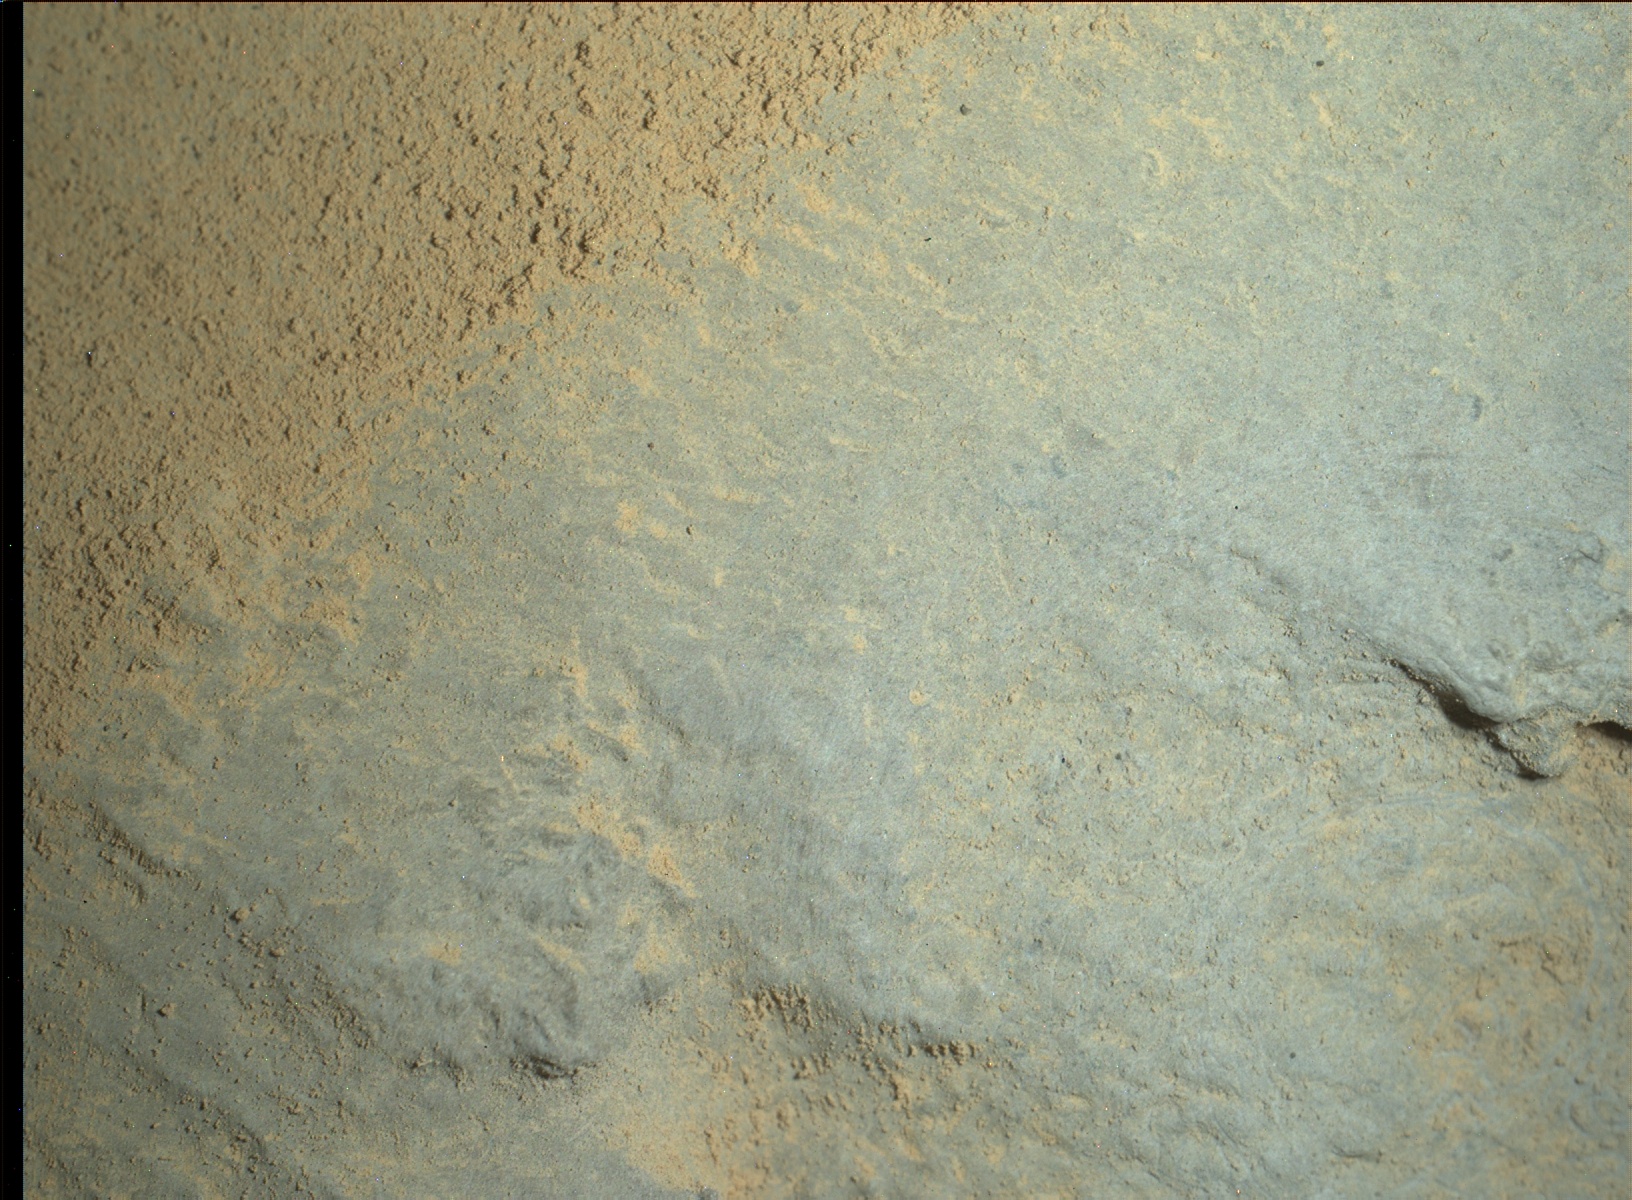 Nasa's Mars rover Curiosity acquired this image using its Mars Hand Lens Imager (MAHLI) on Sol 808